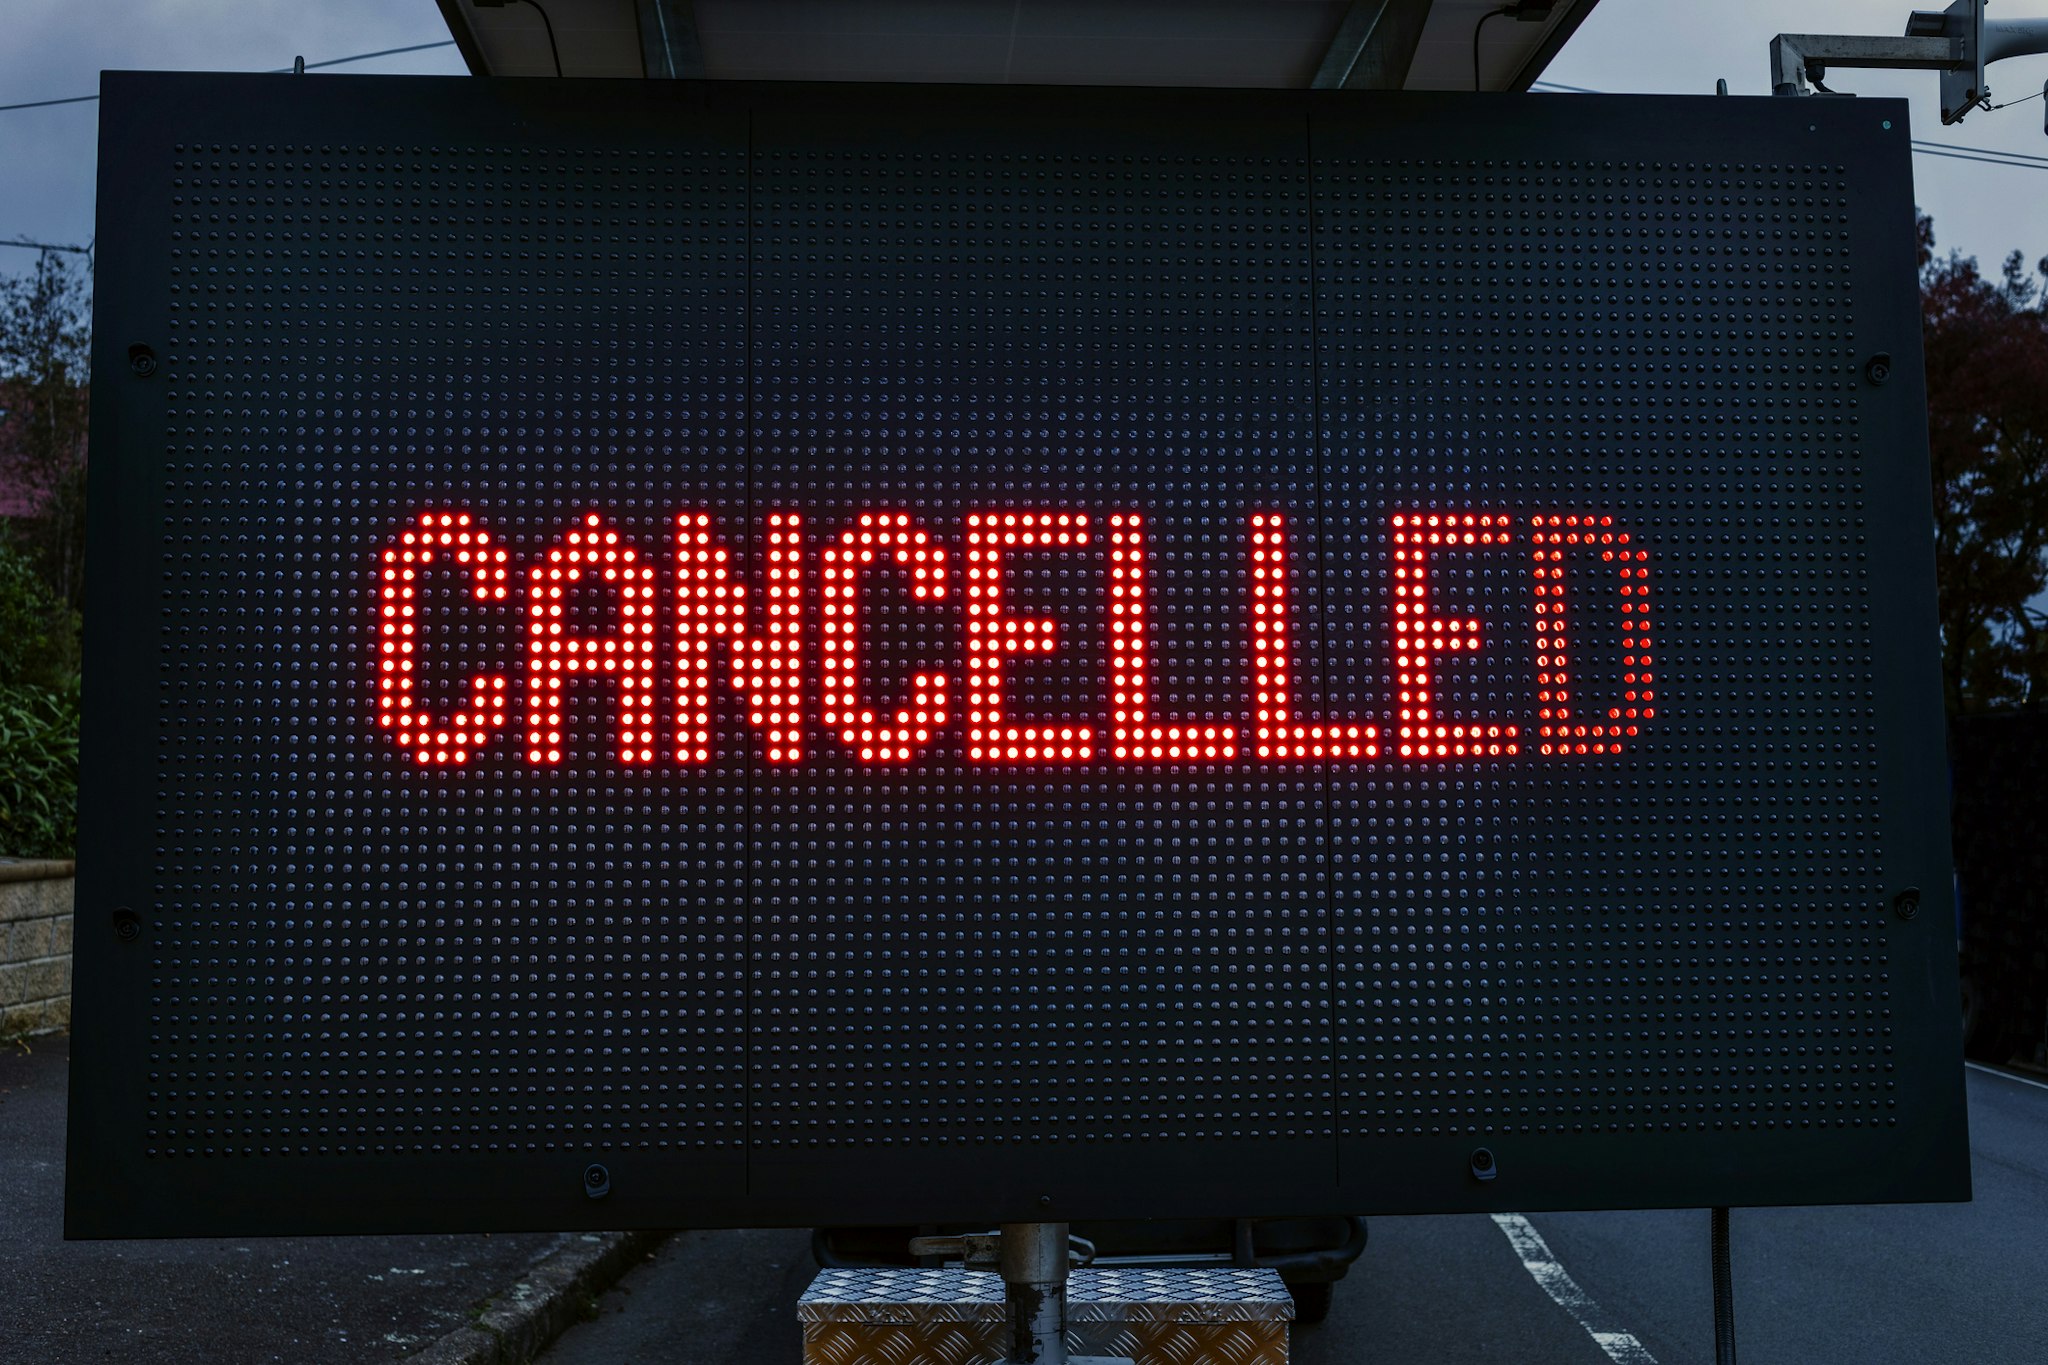 Cancelled sign cancel culture - stock photo